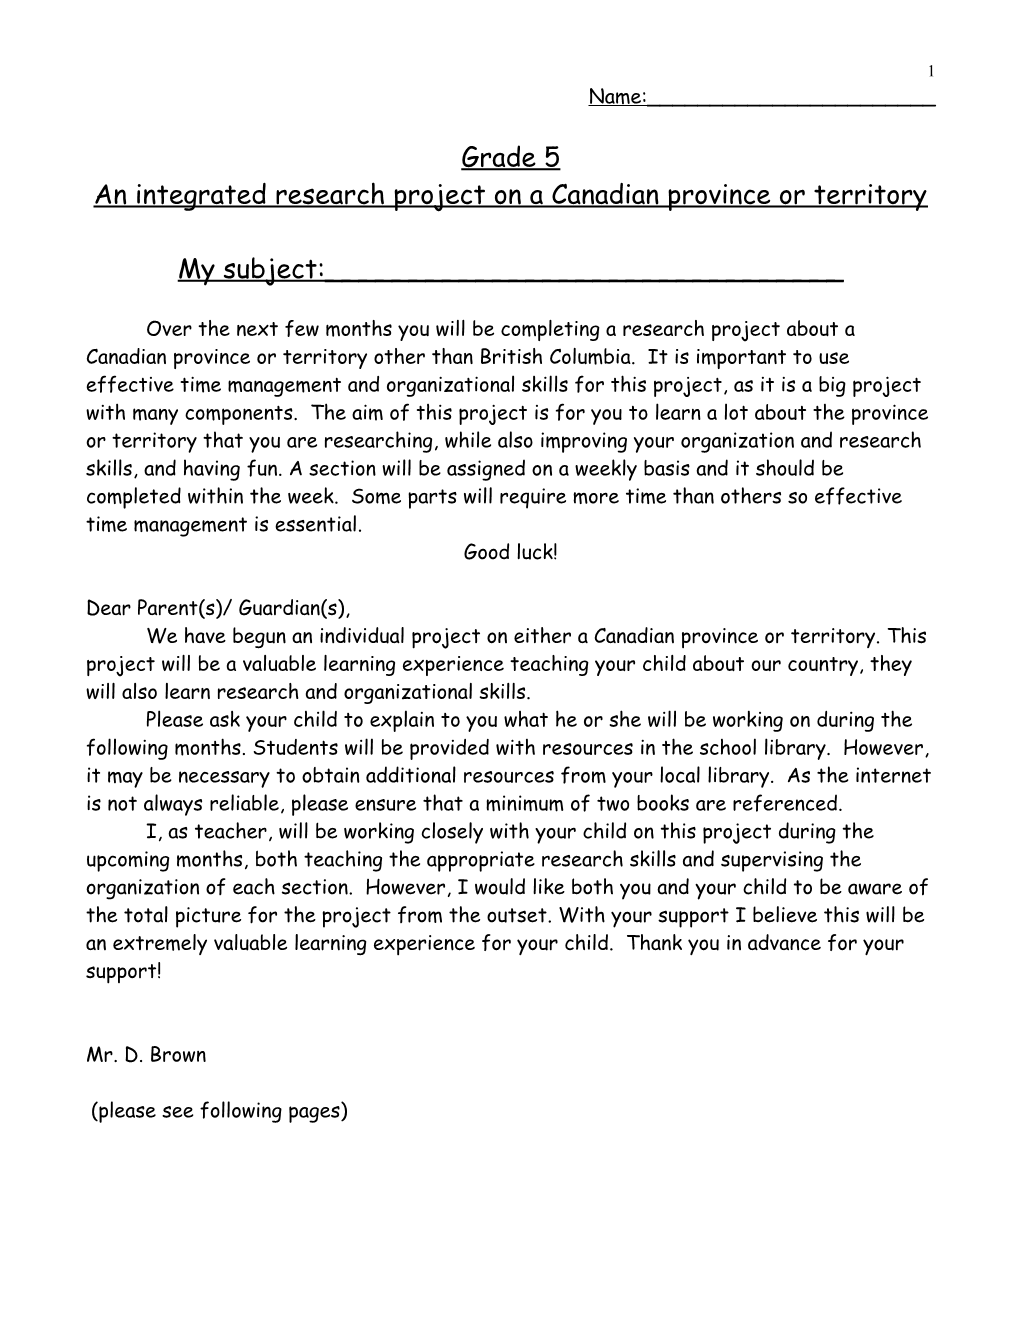 An Integrated Research Project on a Canadian Province Or Territory